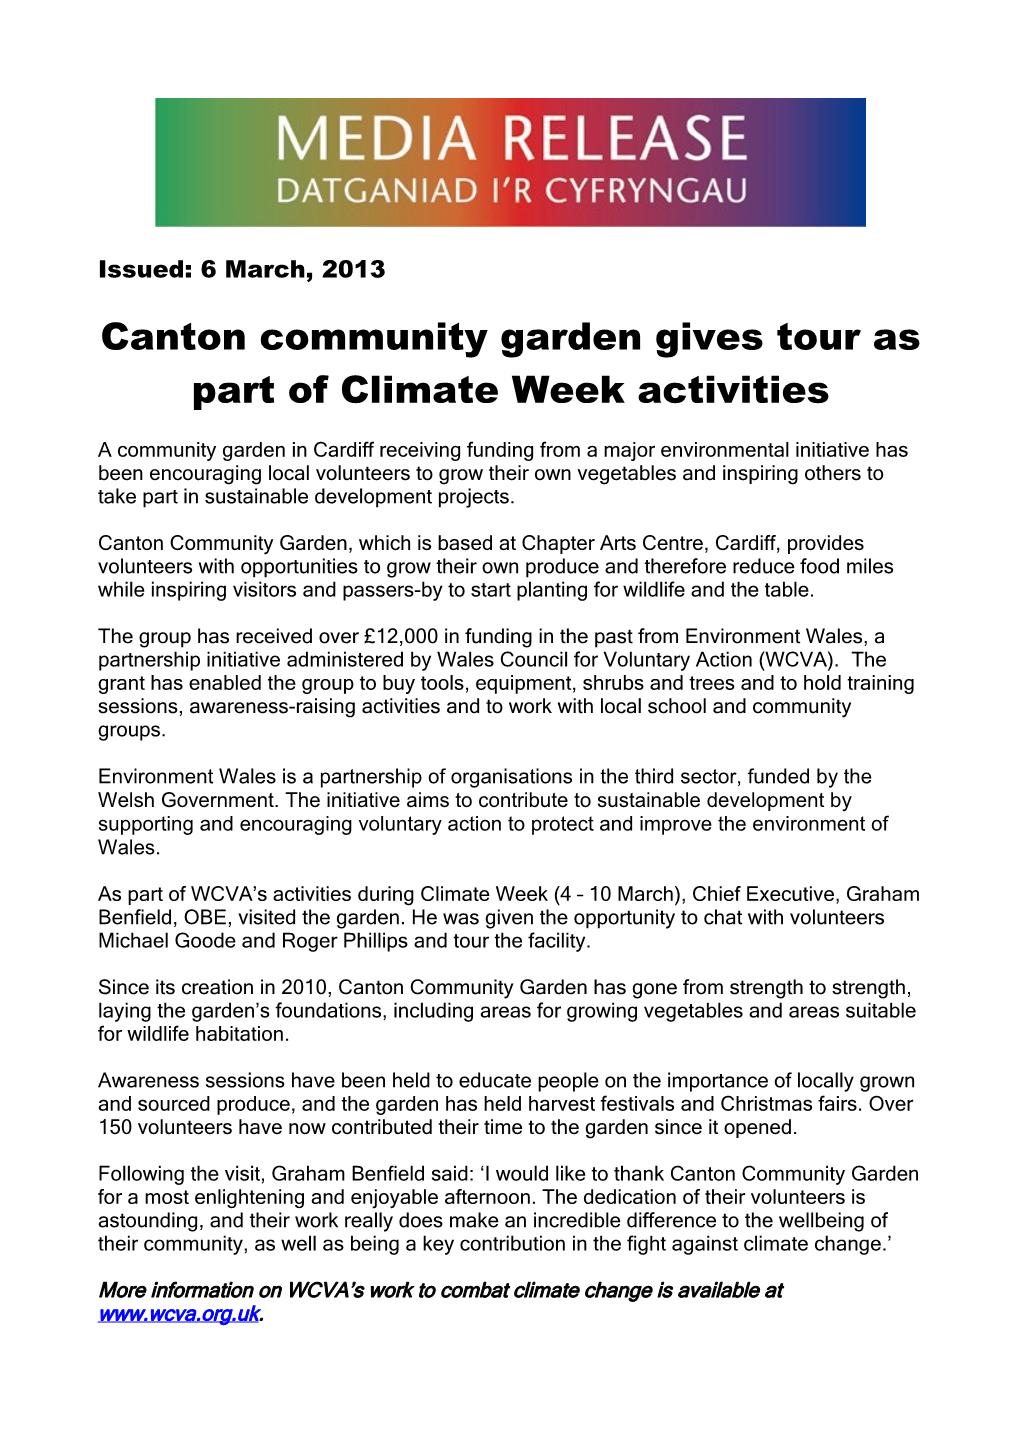 Canton Community Garden Gives Tour As Part of Climate Week Activities